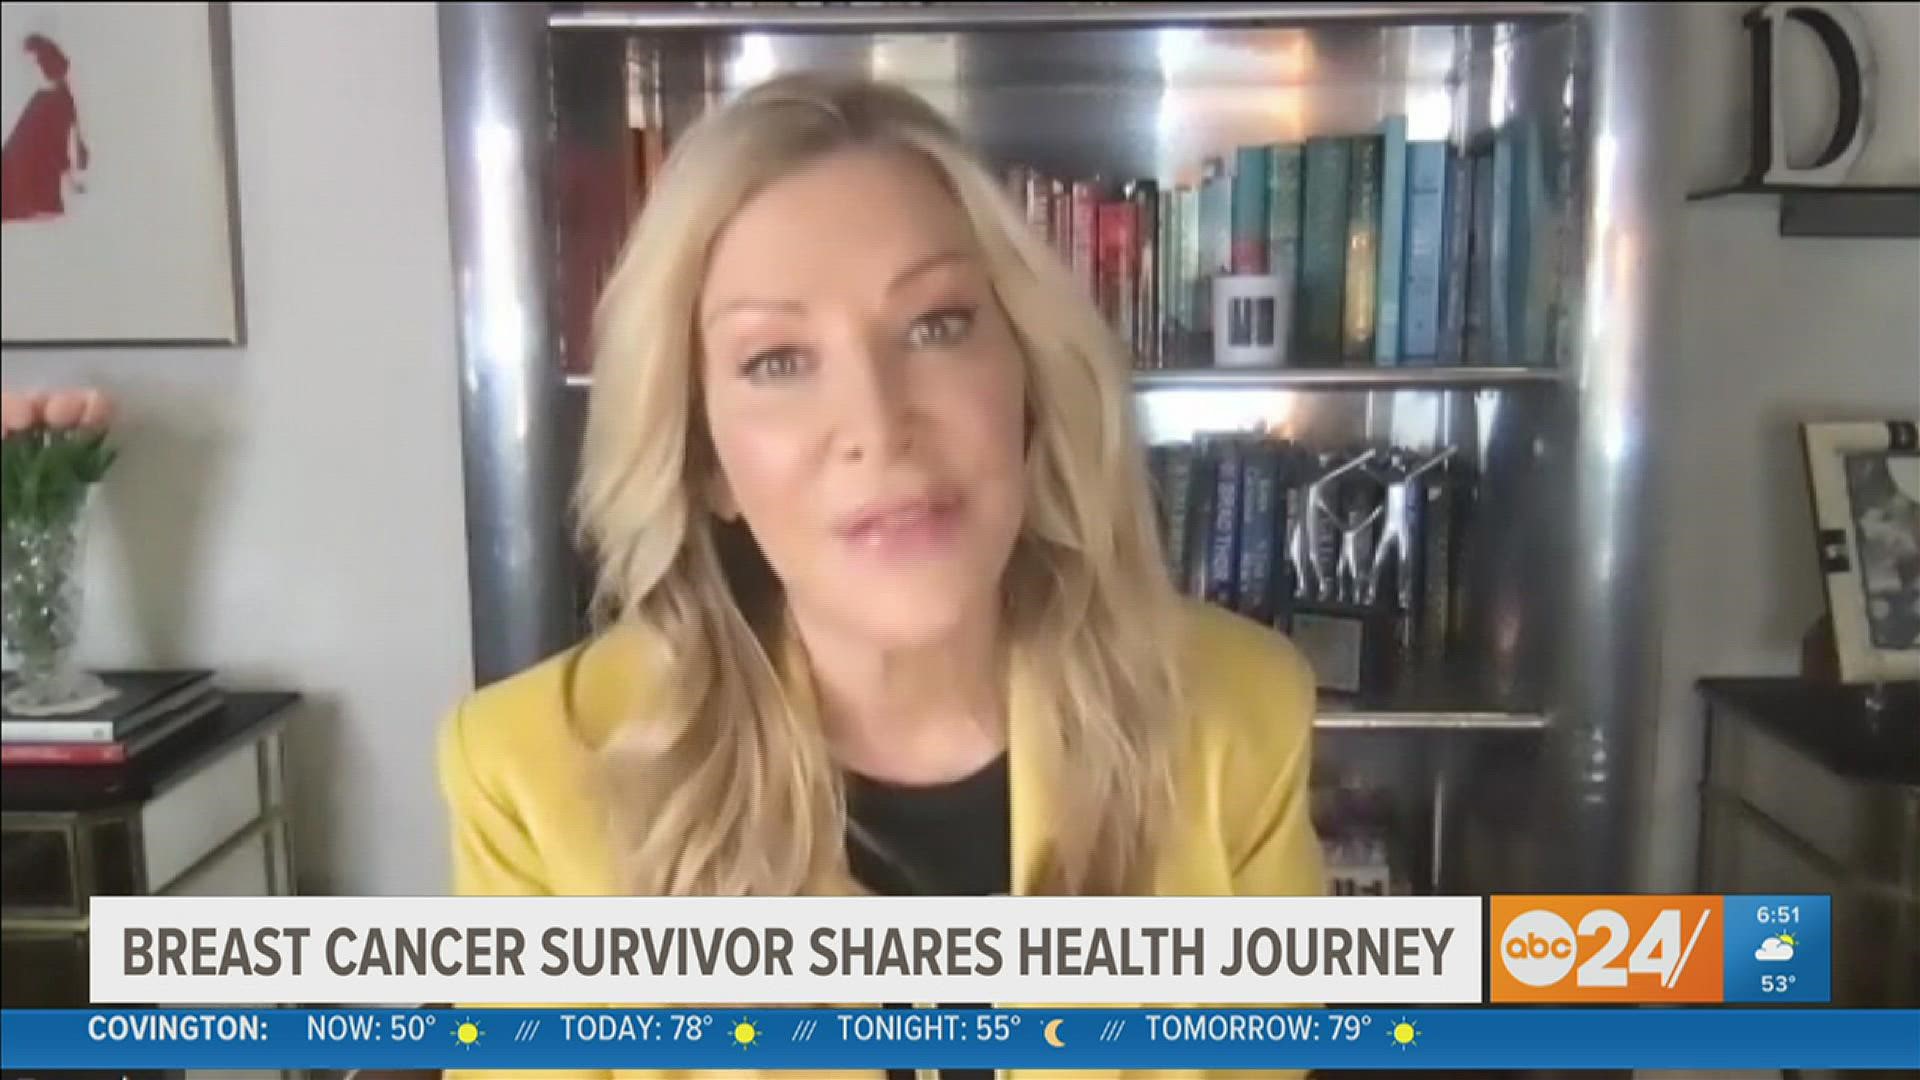 Kym Douglas shares her story of survival with breast cancer.